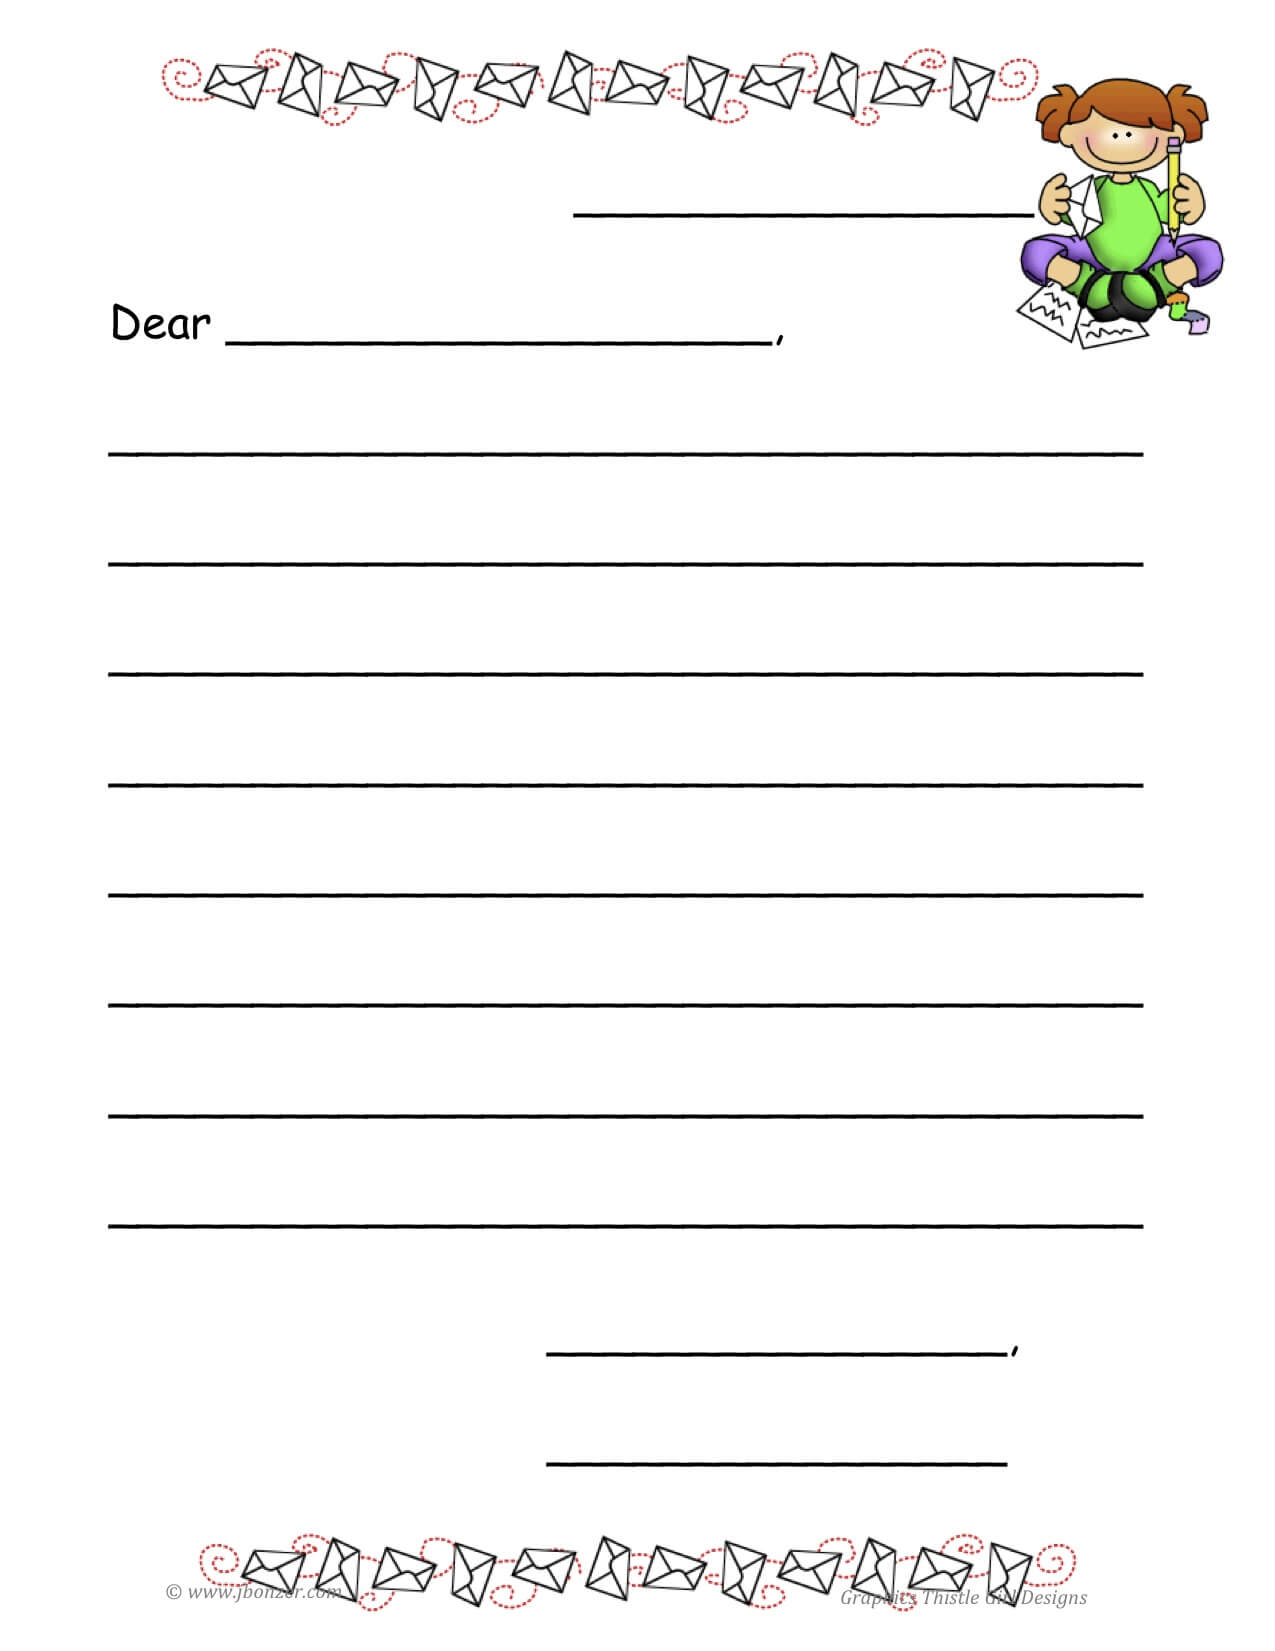 Blank Letter Writing Paper | Floss Papers With Blank Letter Writing Template For Kids